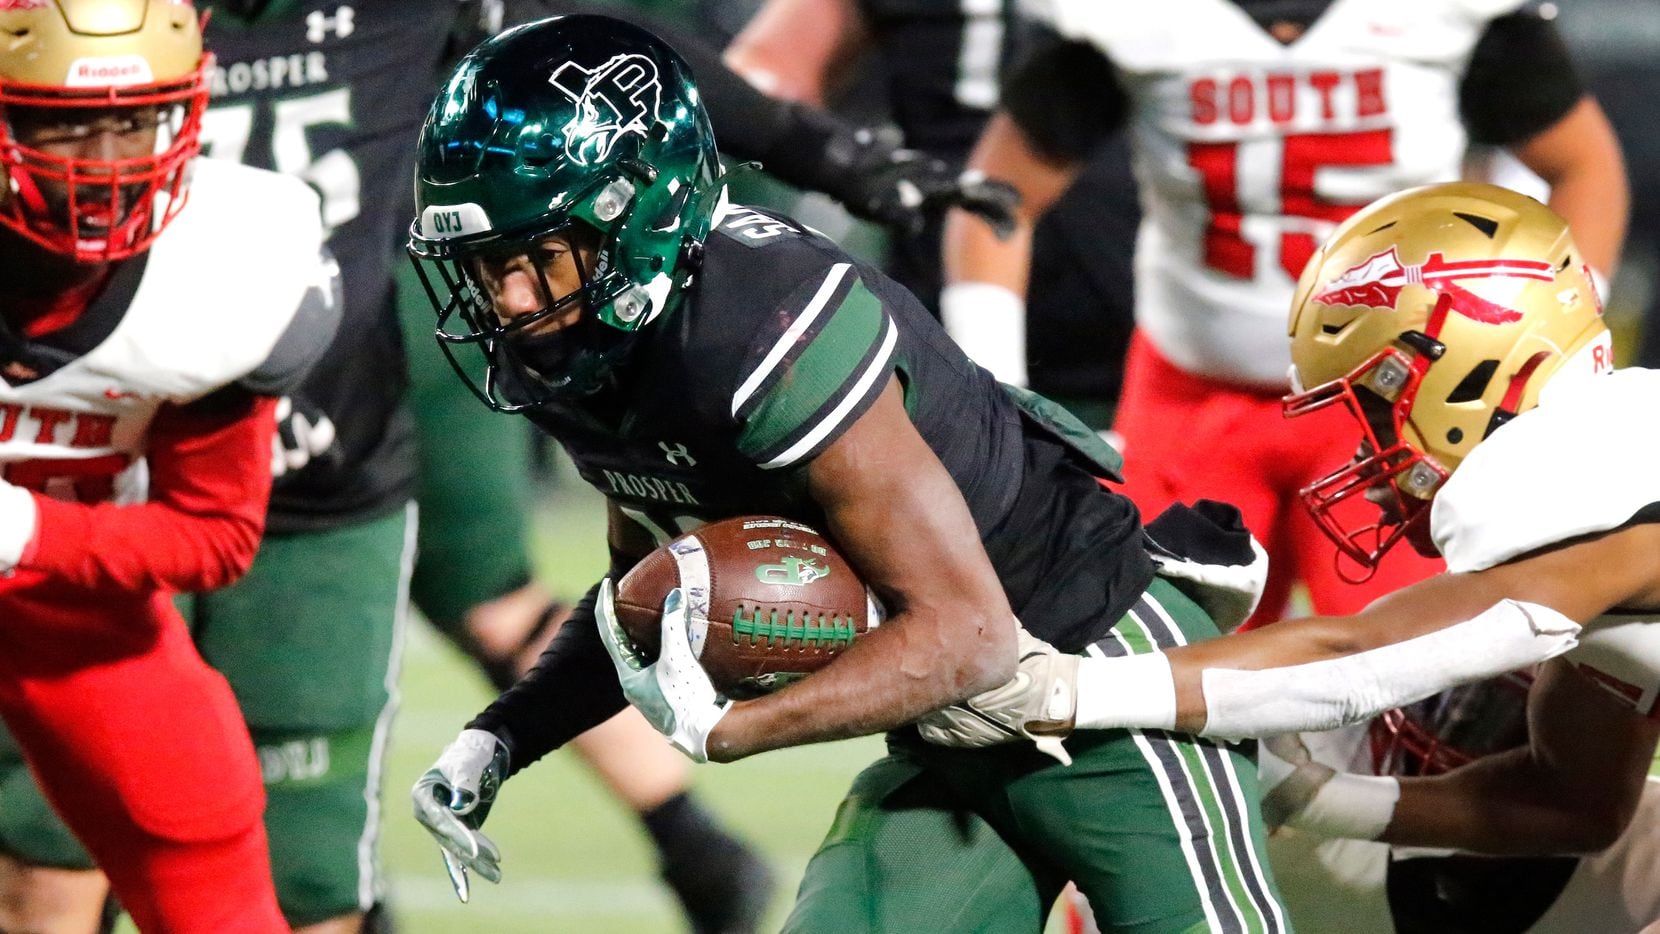 Prosper High School running back Prentis Sanders (13) finds the end zone on this run during...